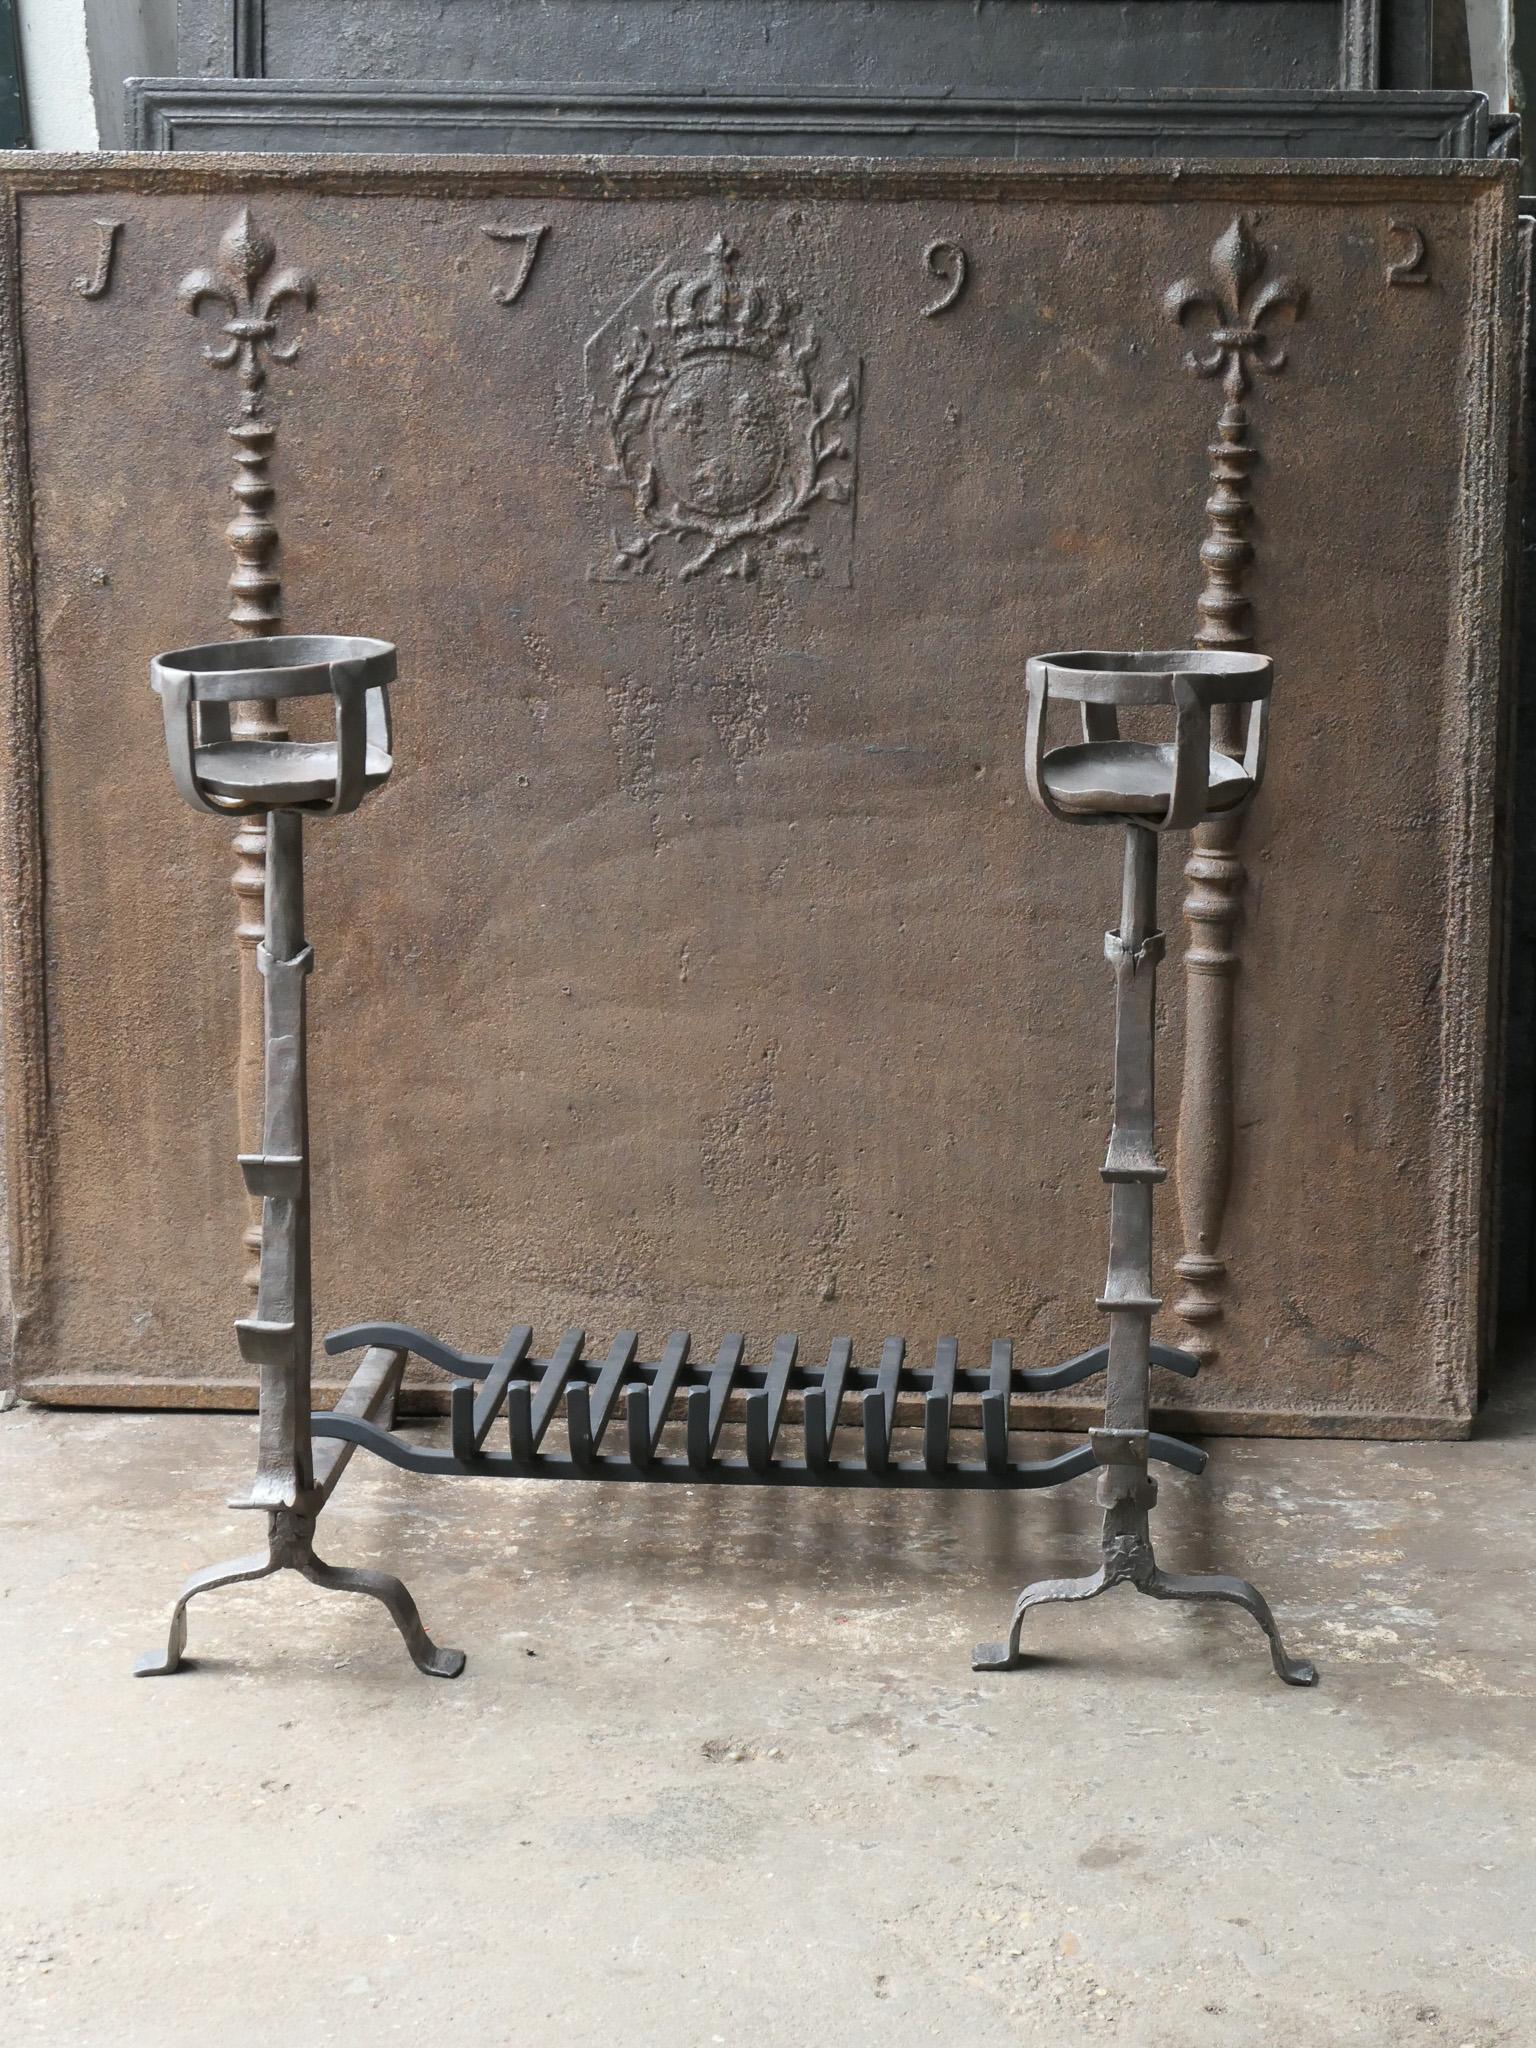 17th century French Gothic fire grate with period andirons and a recently forged grate. Made of wrought iron. The condition is good. 

The total width at the front of the grate is 81 cm / 31.9 inches.







